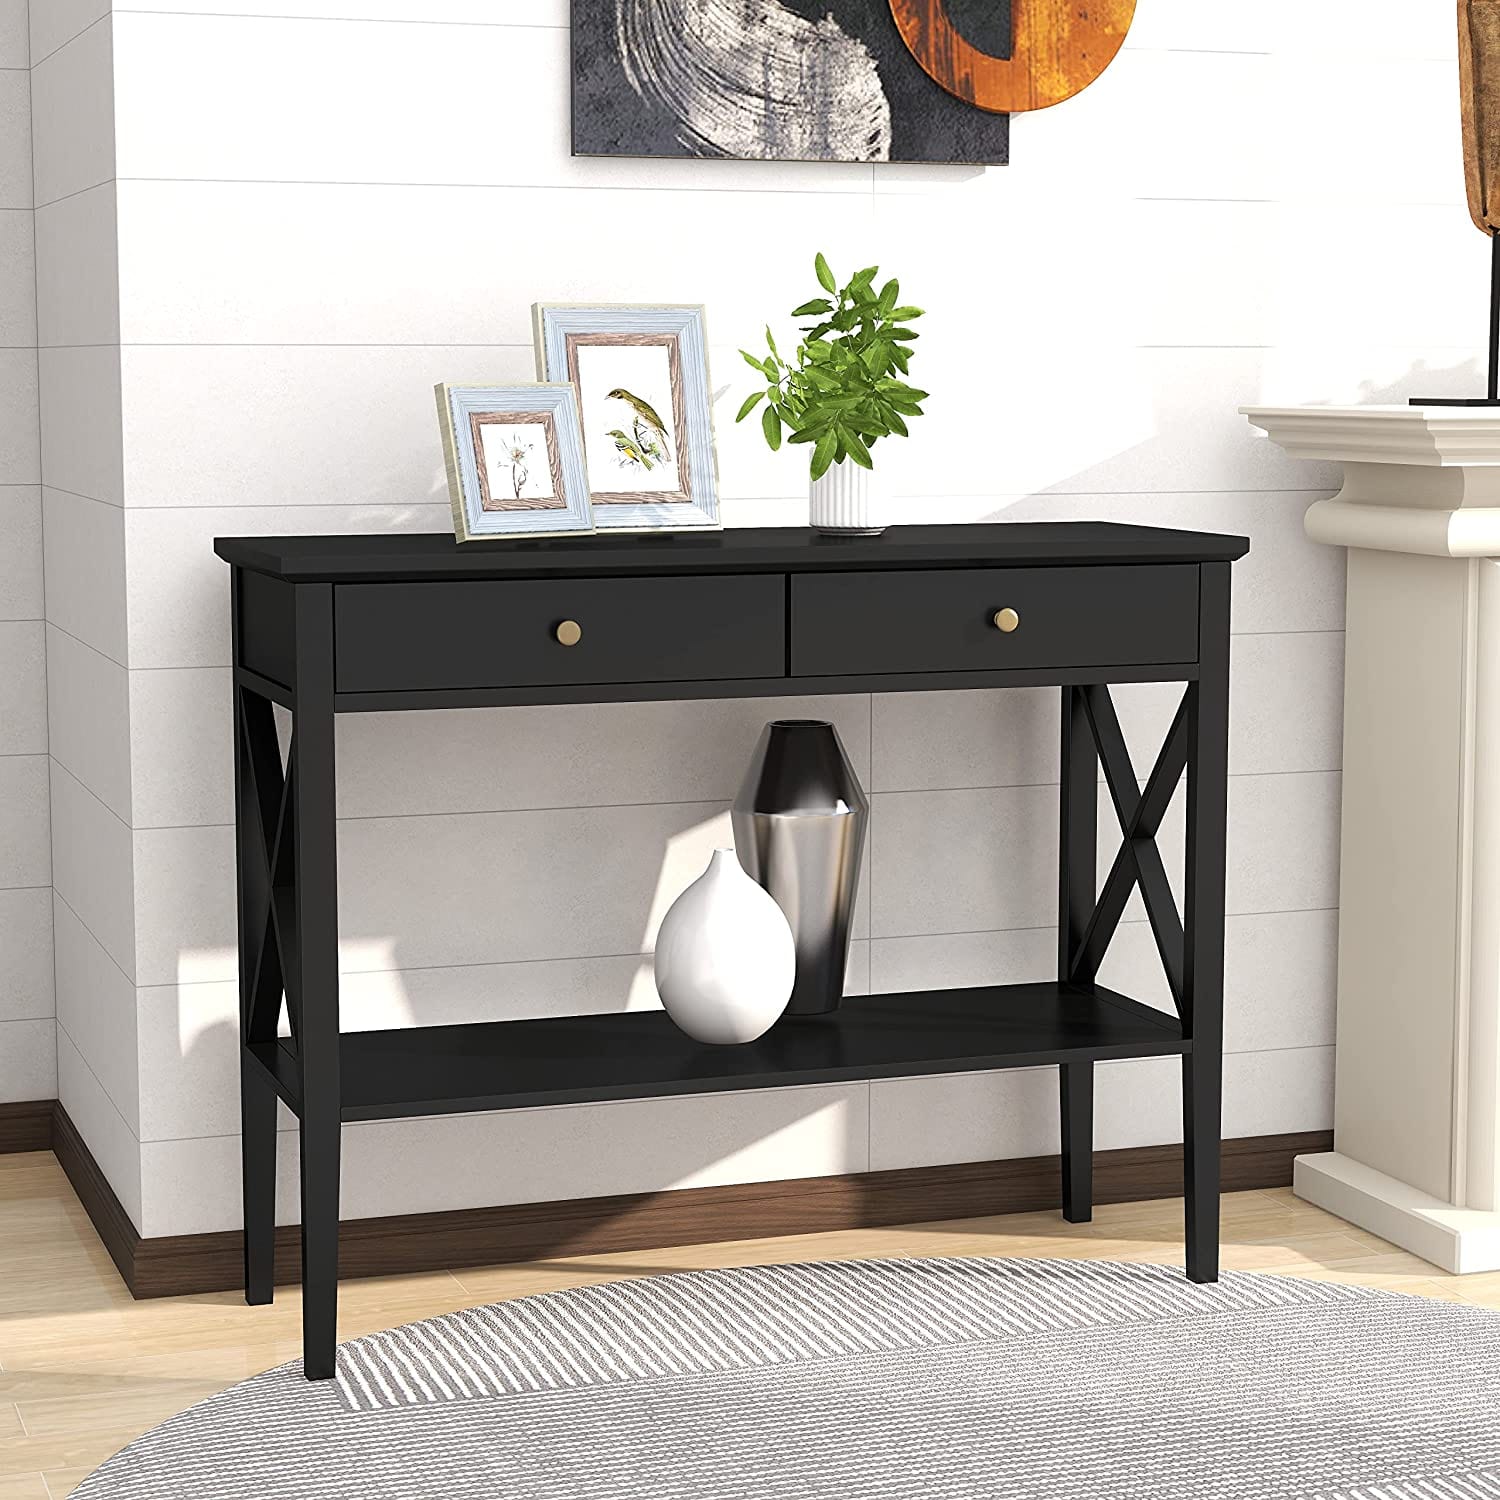 Console Table with 2 Drawers, Sofa Table Narrow for Entryway,